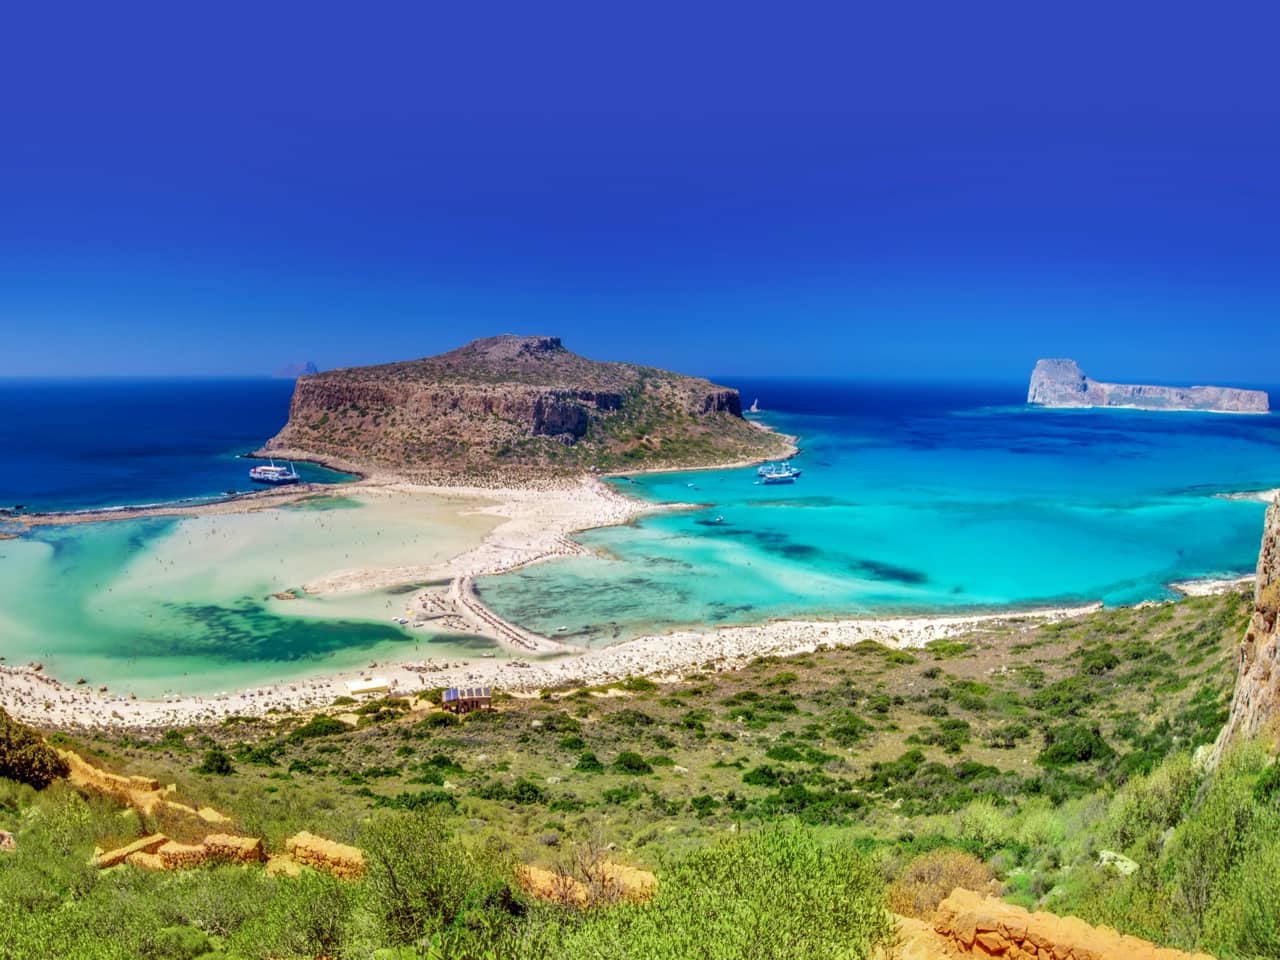 Private Premium Safari Road Trip to Balos Lagoo, jeep safari to balos beach, balos beach chania crete, activities chania, what to do chania, how to visit balos, best way to visit balos lagoon, crete travel, small tours to balos lagoon crete